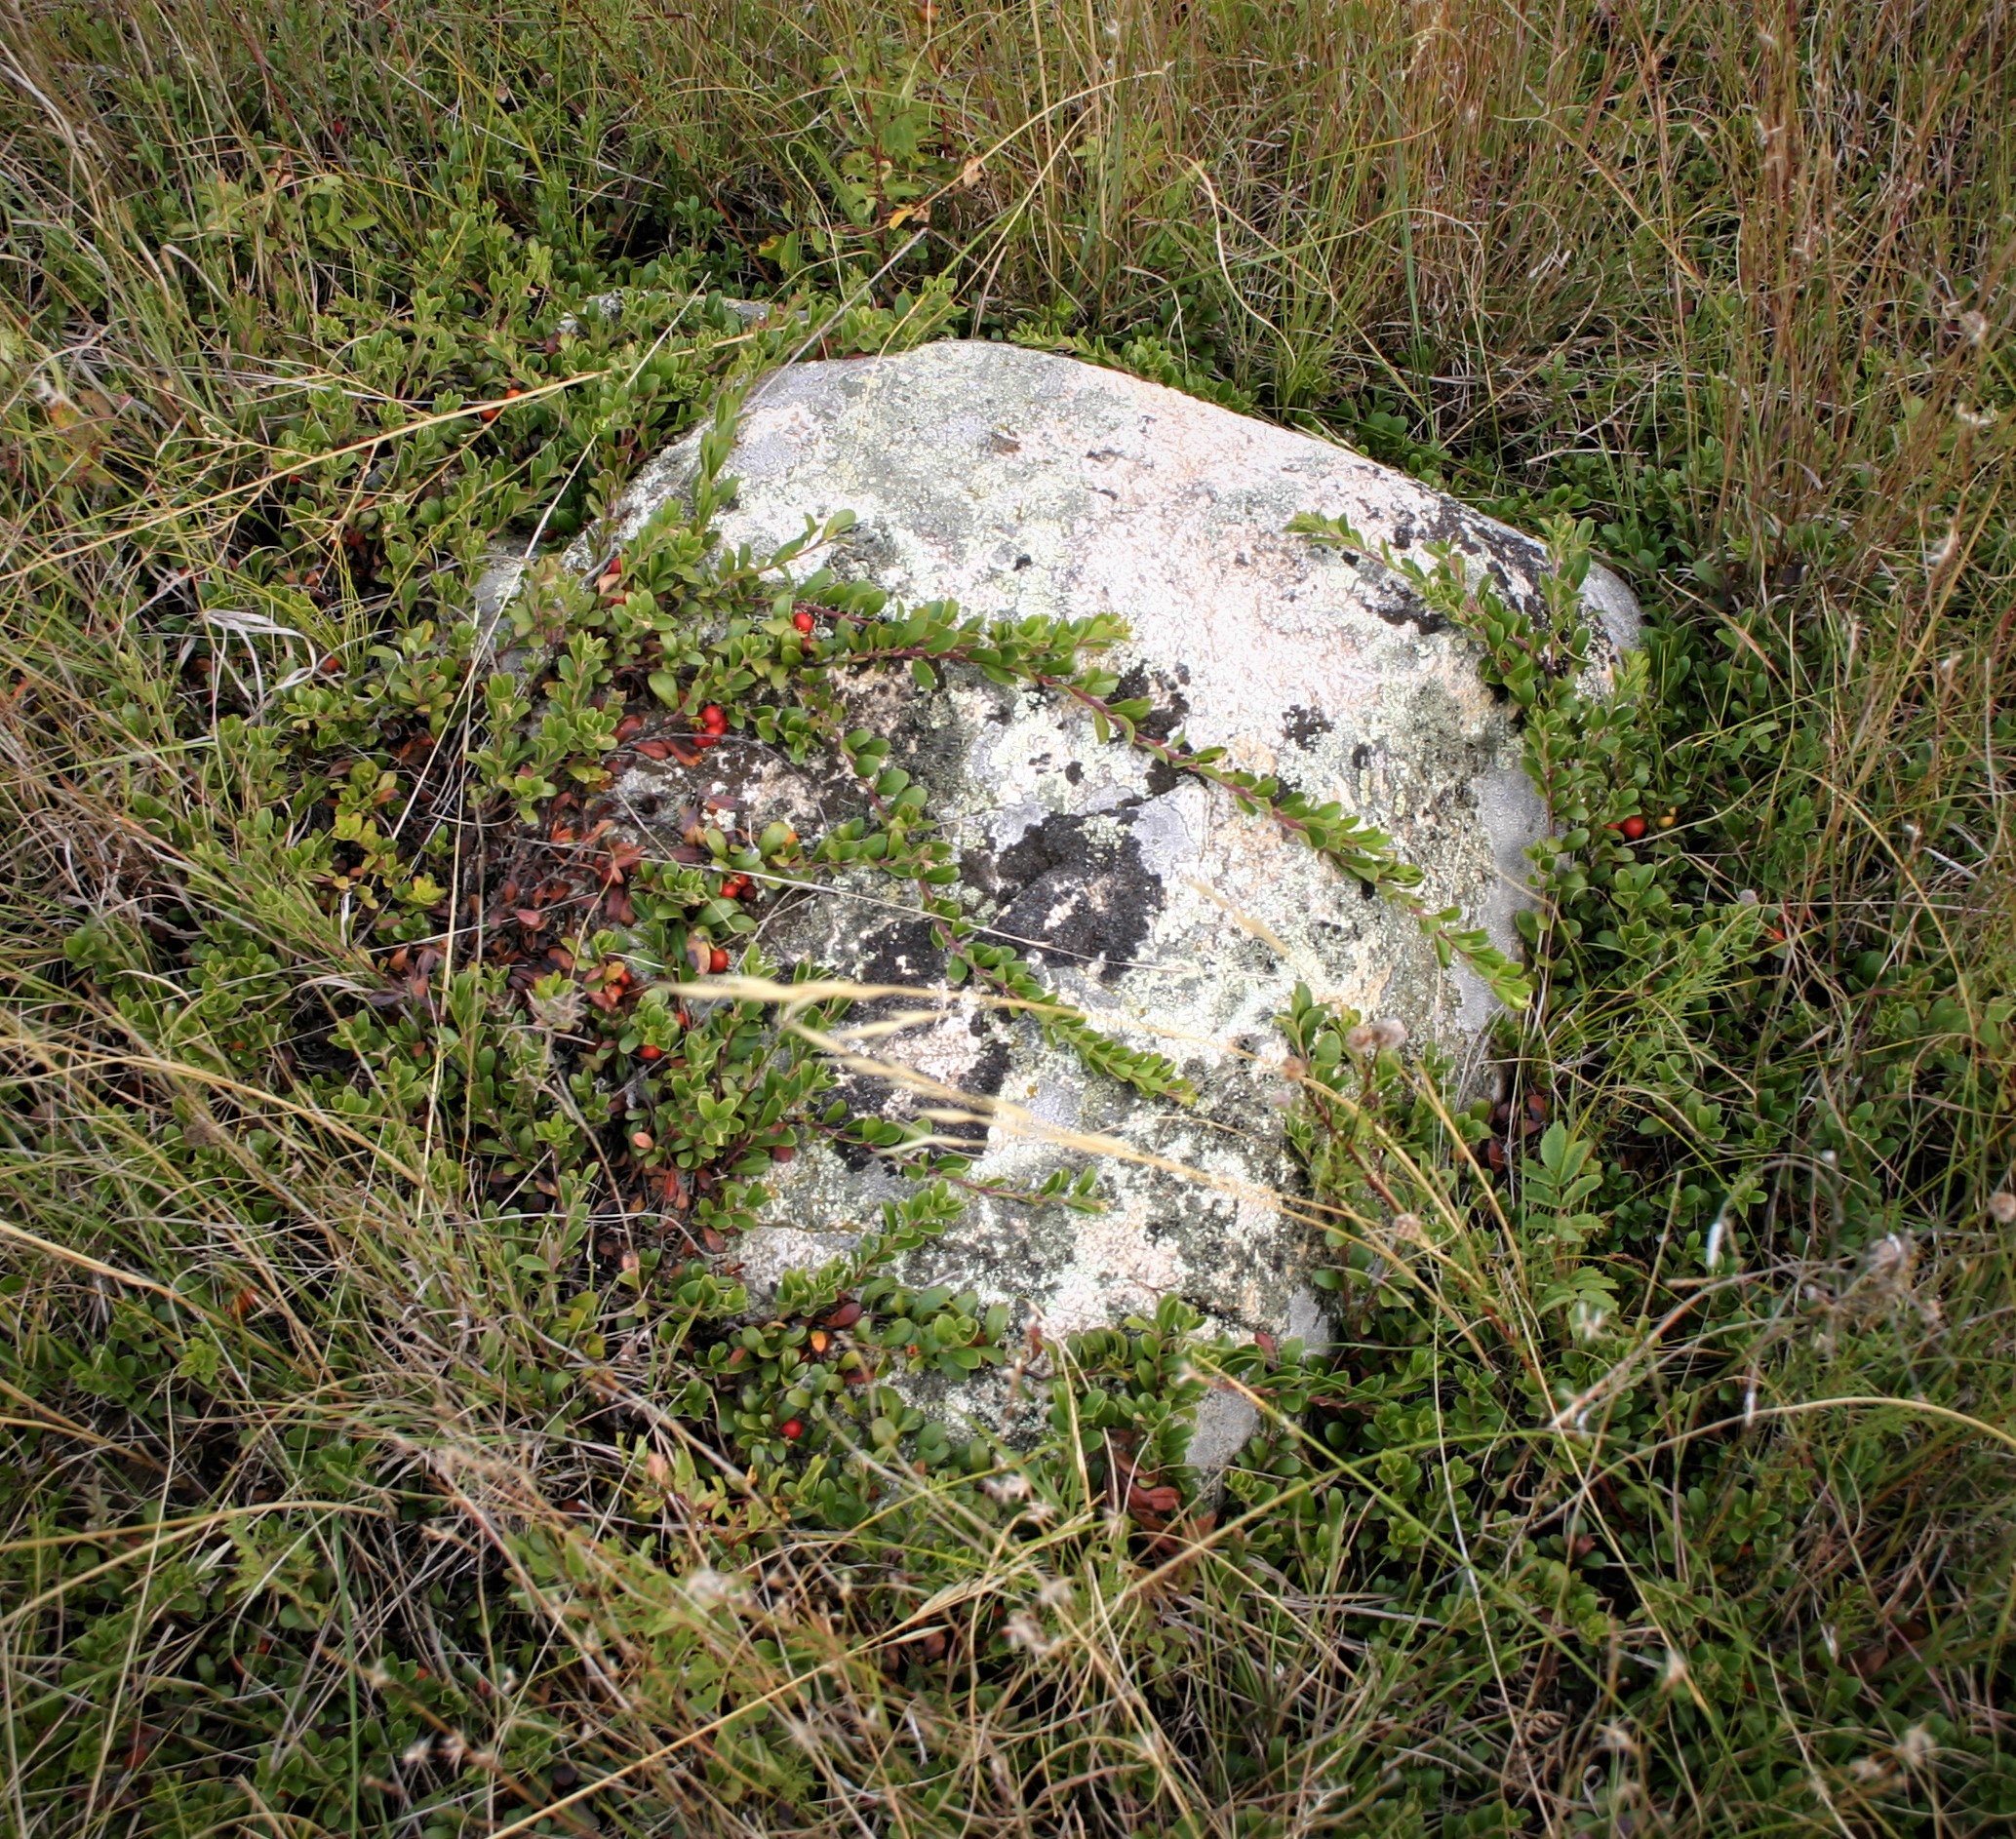 A stone partially embedded in grassy ground with a creeping vine-like plant with small green leaves and red berries growing across it.